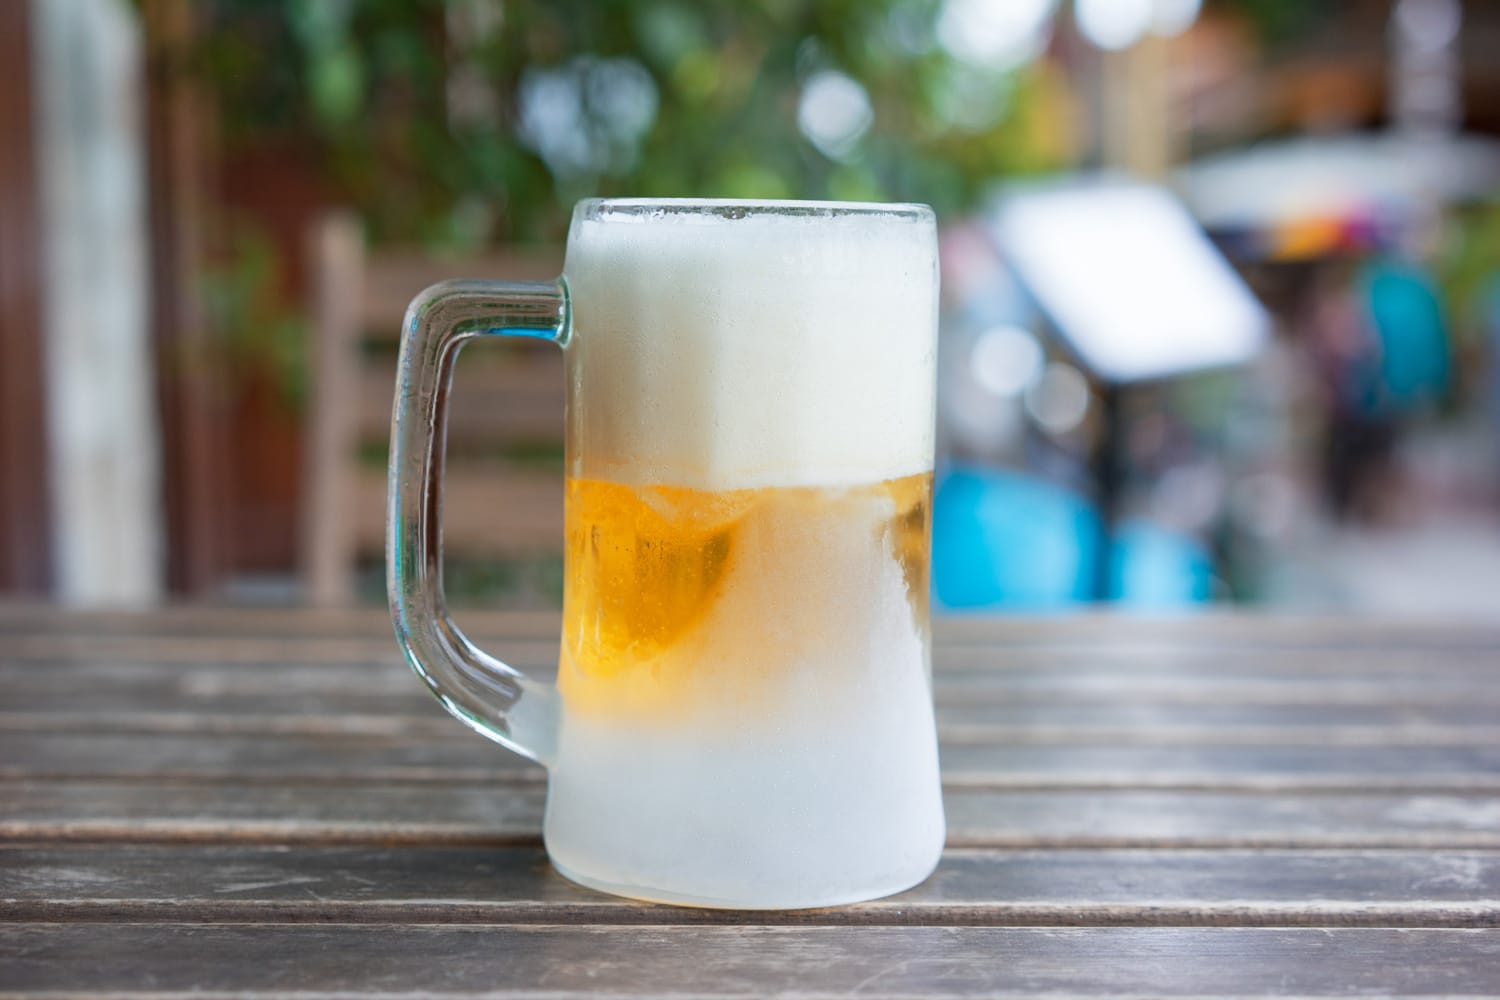 The Frozen mug of cold light beer at the pub wooden table, close up